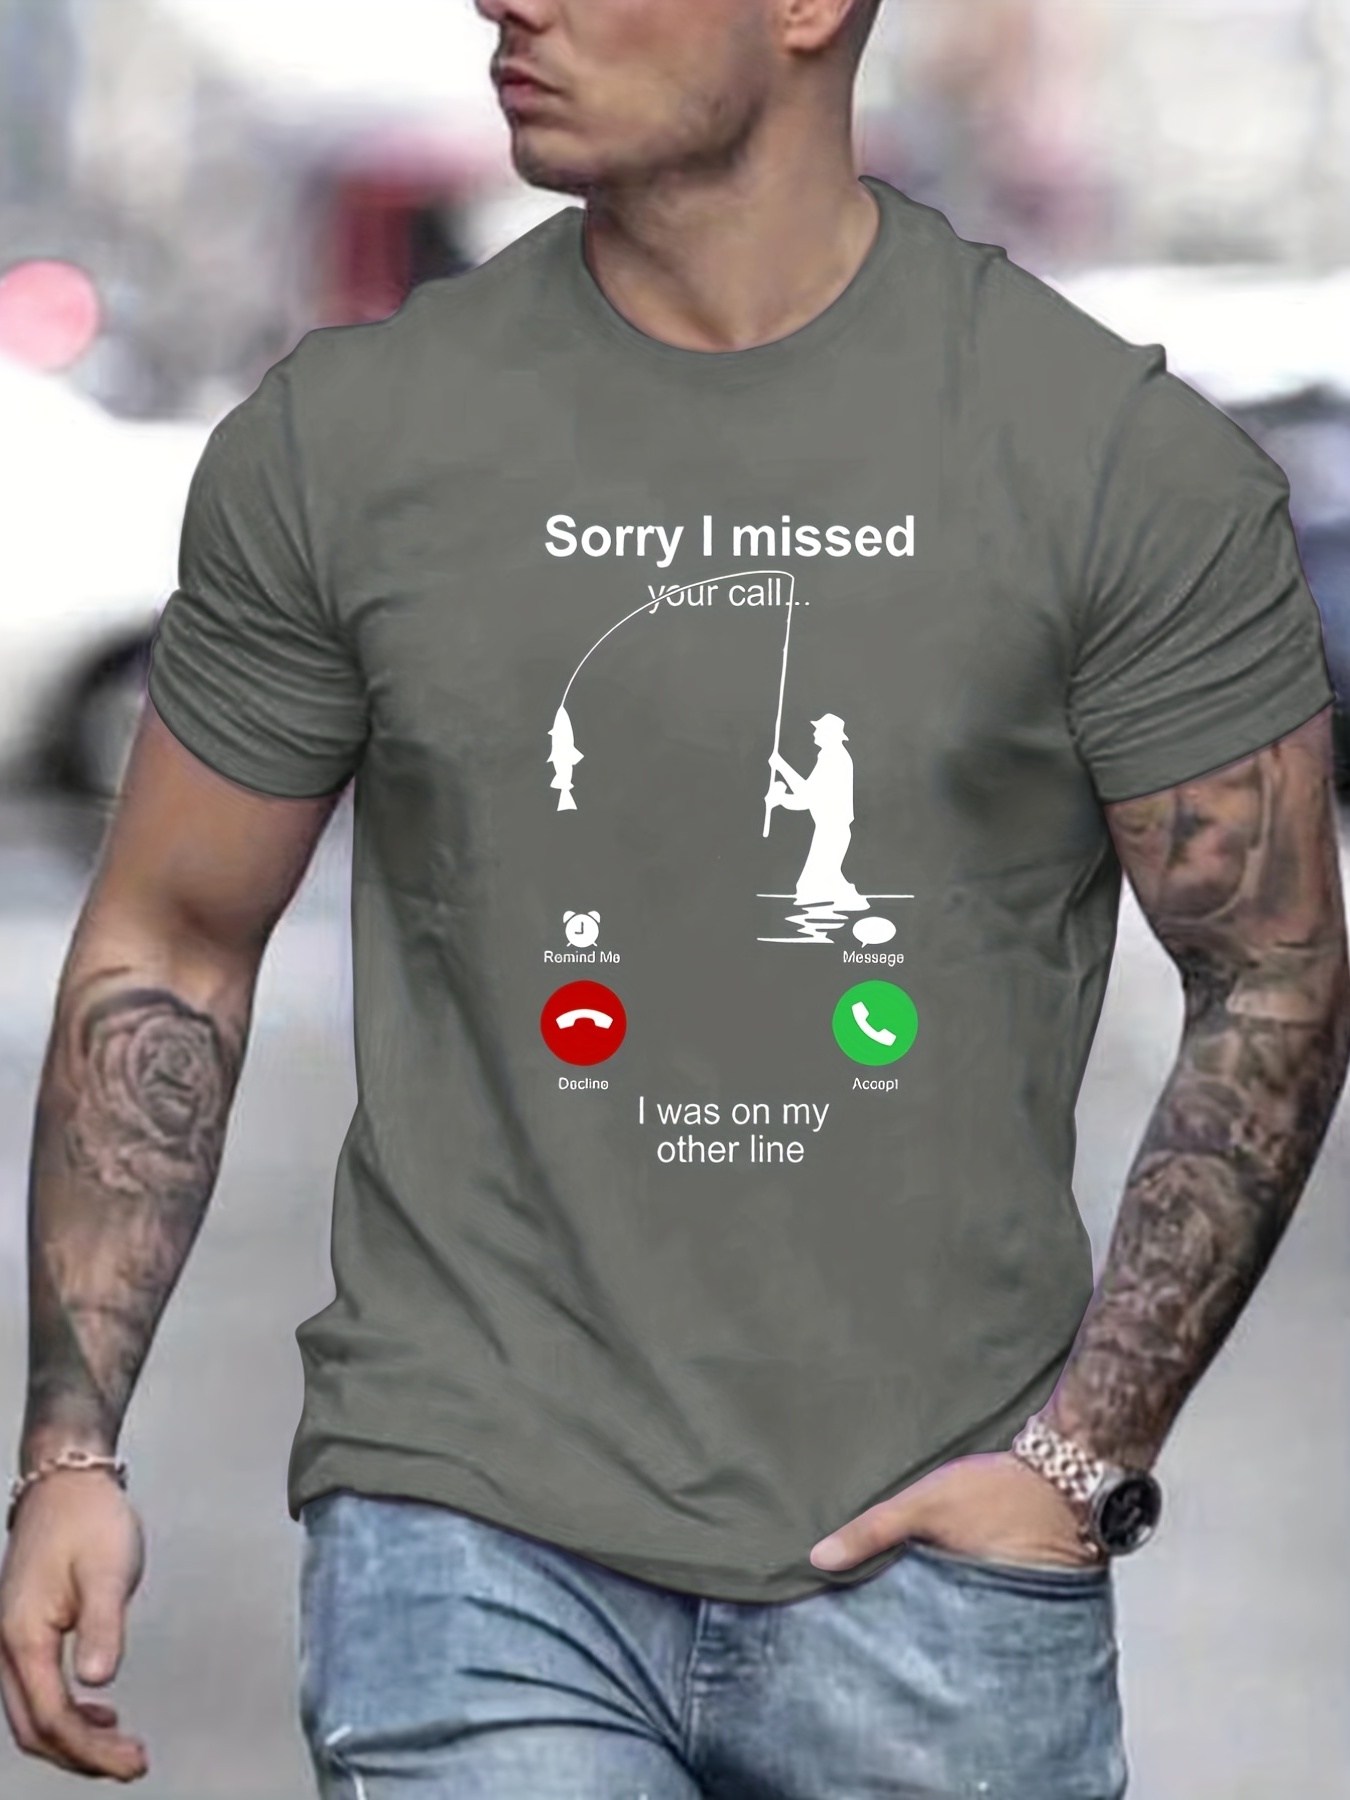  Sorry I Missed Your Call Was On Other Line Funny Men